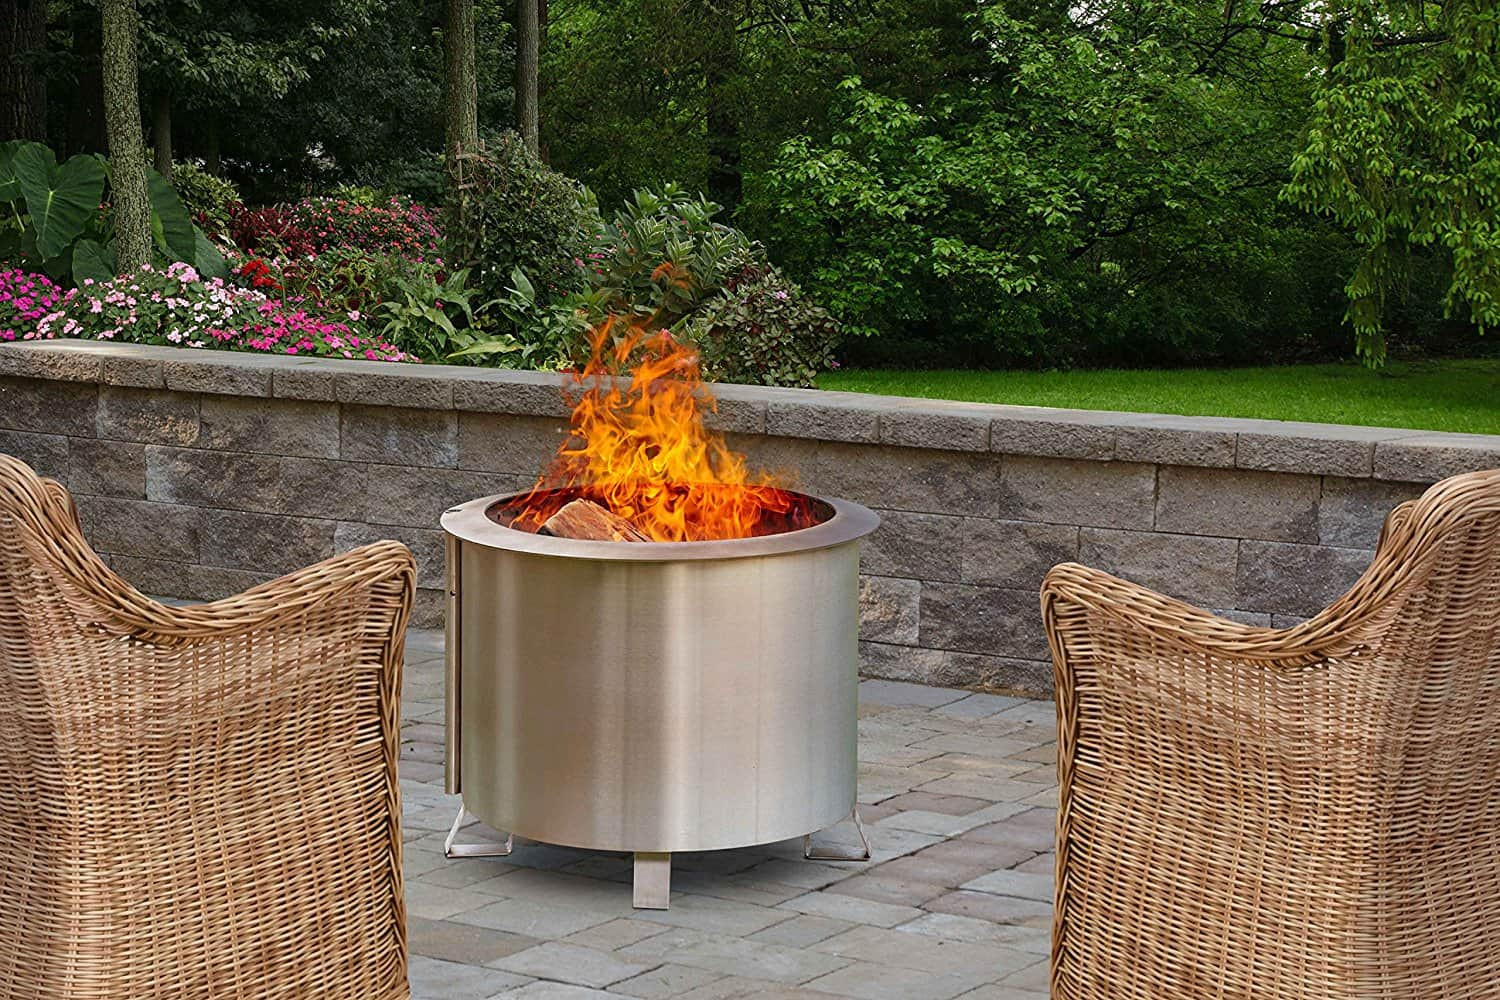 Double Flame Patio Fire Pit
 Top Rated Stainless Steel Fire Pit and Bowls Reviewed